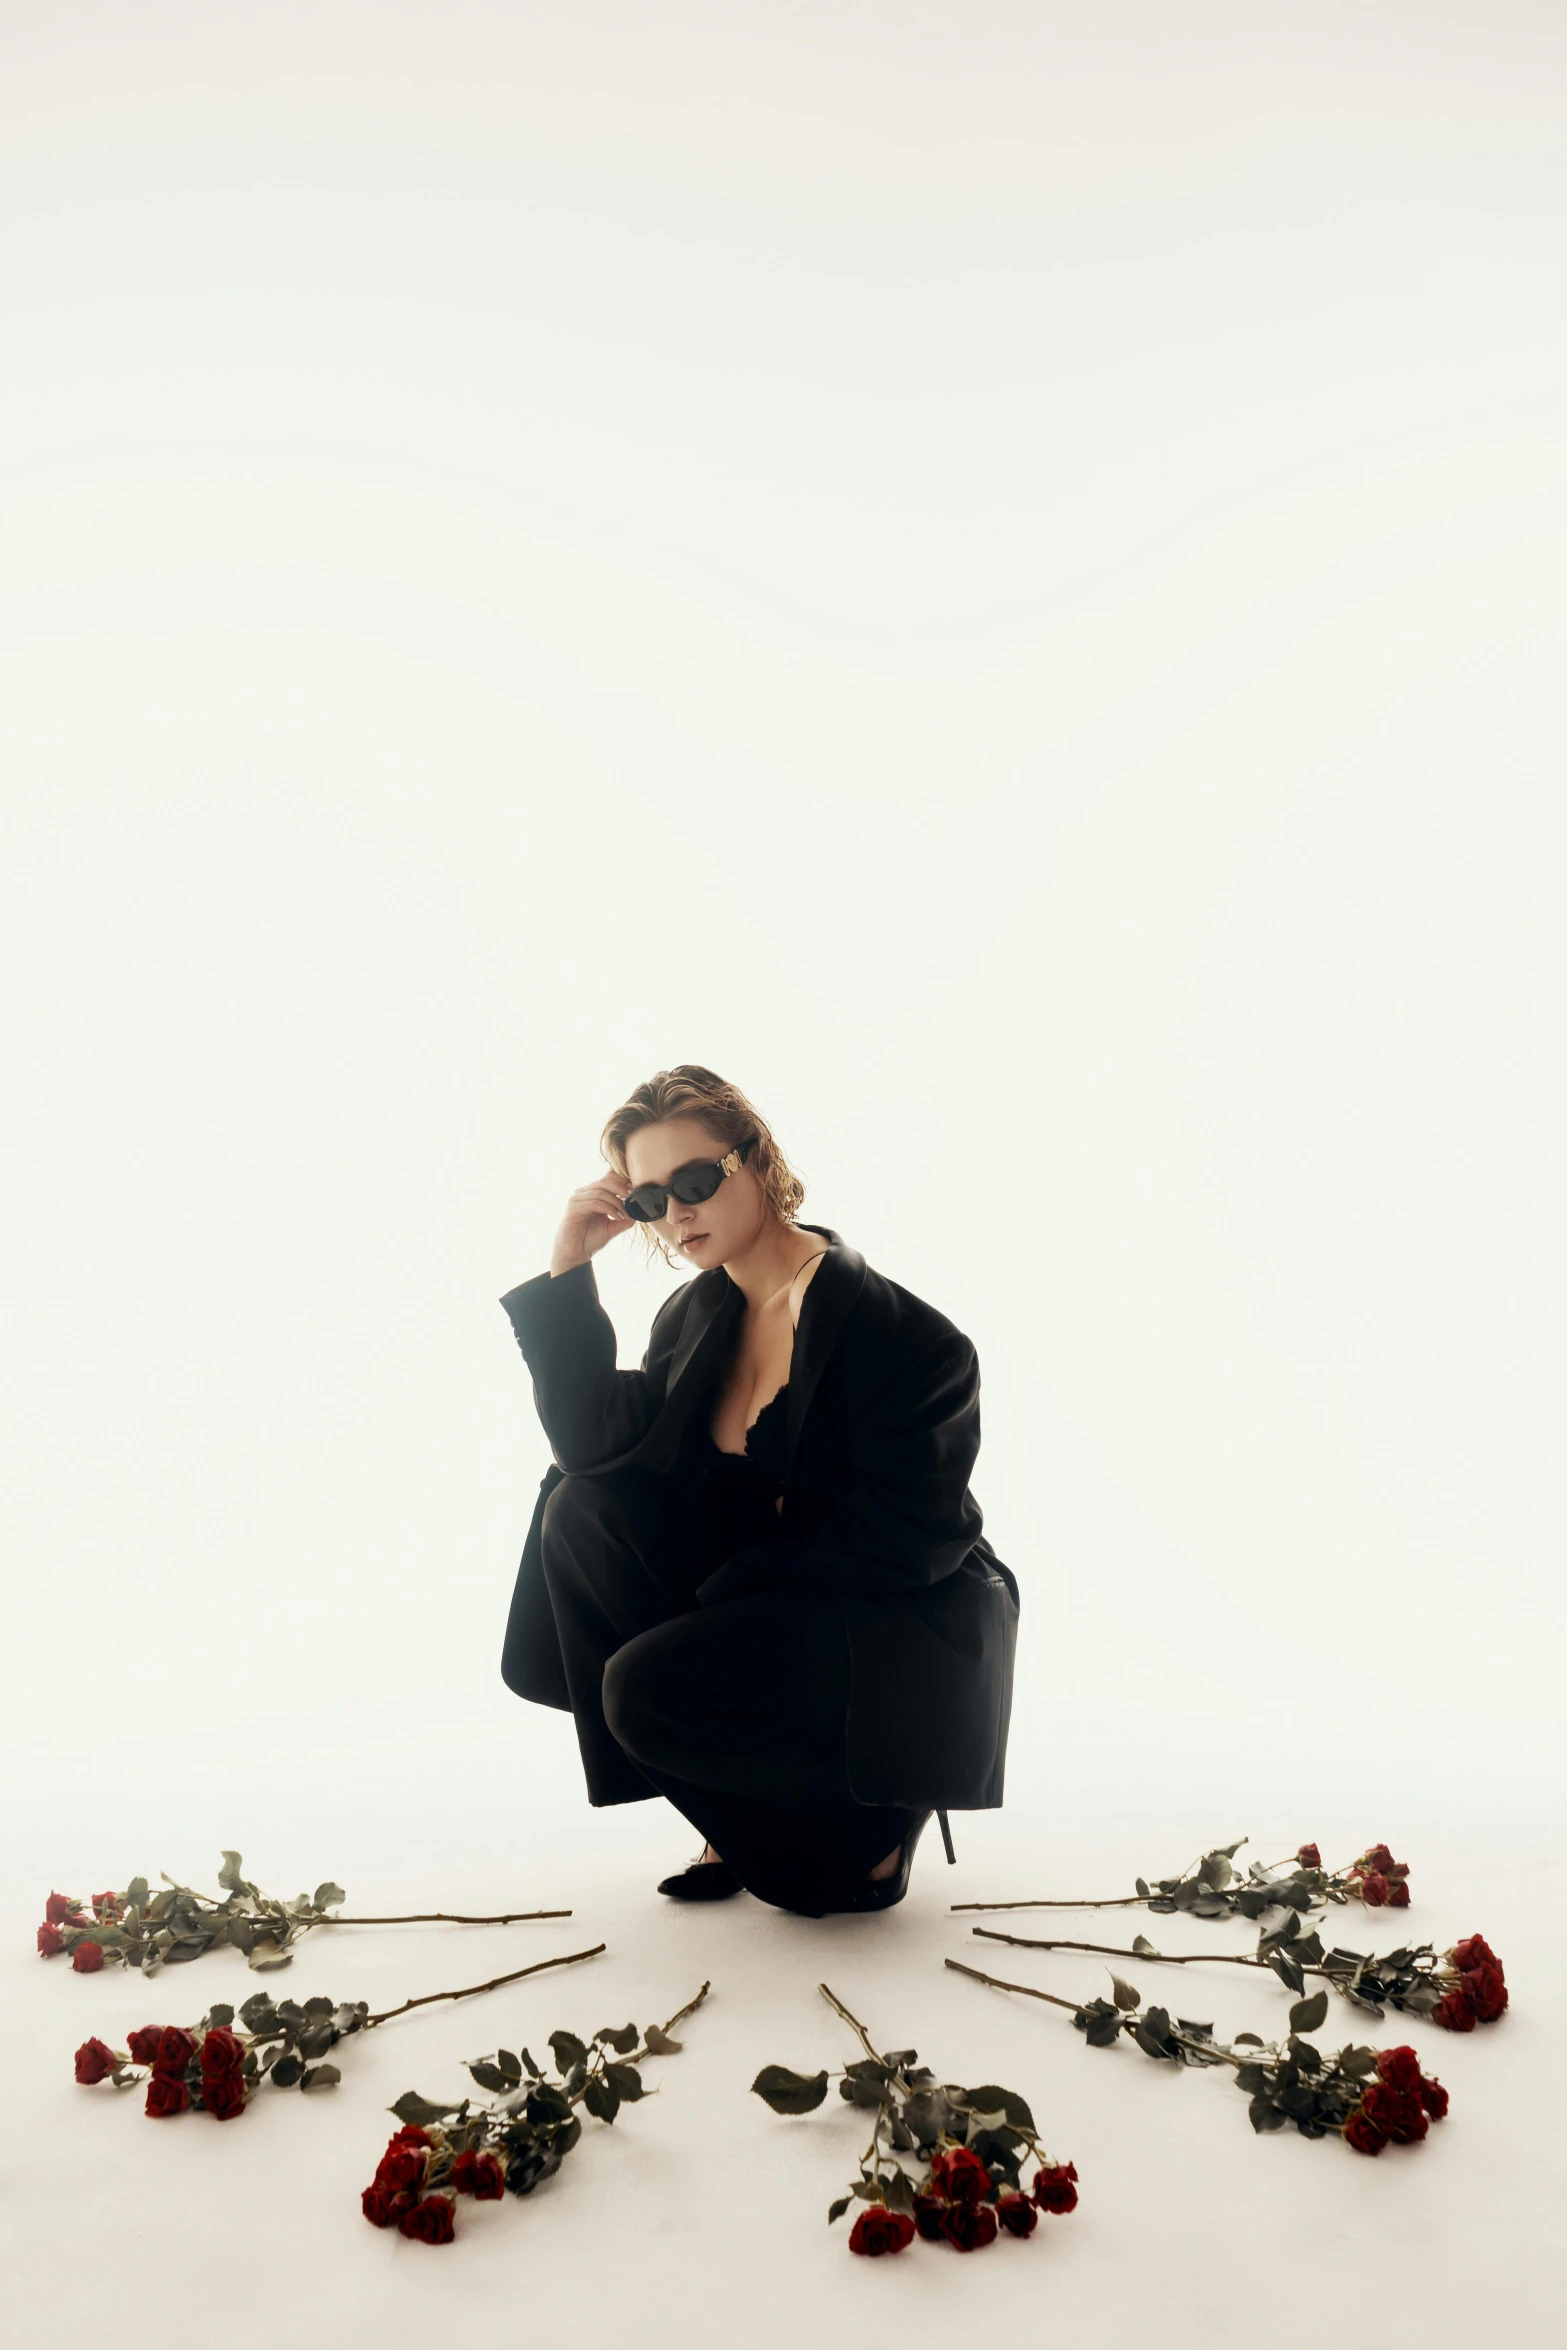 a woman in black is sitting on a white background, surrounded by flowers